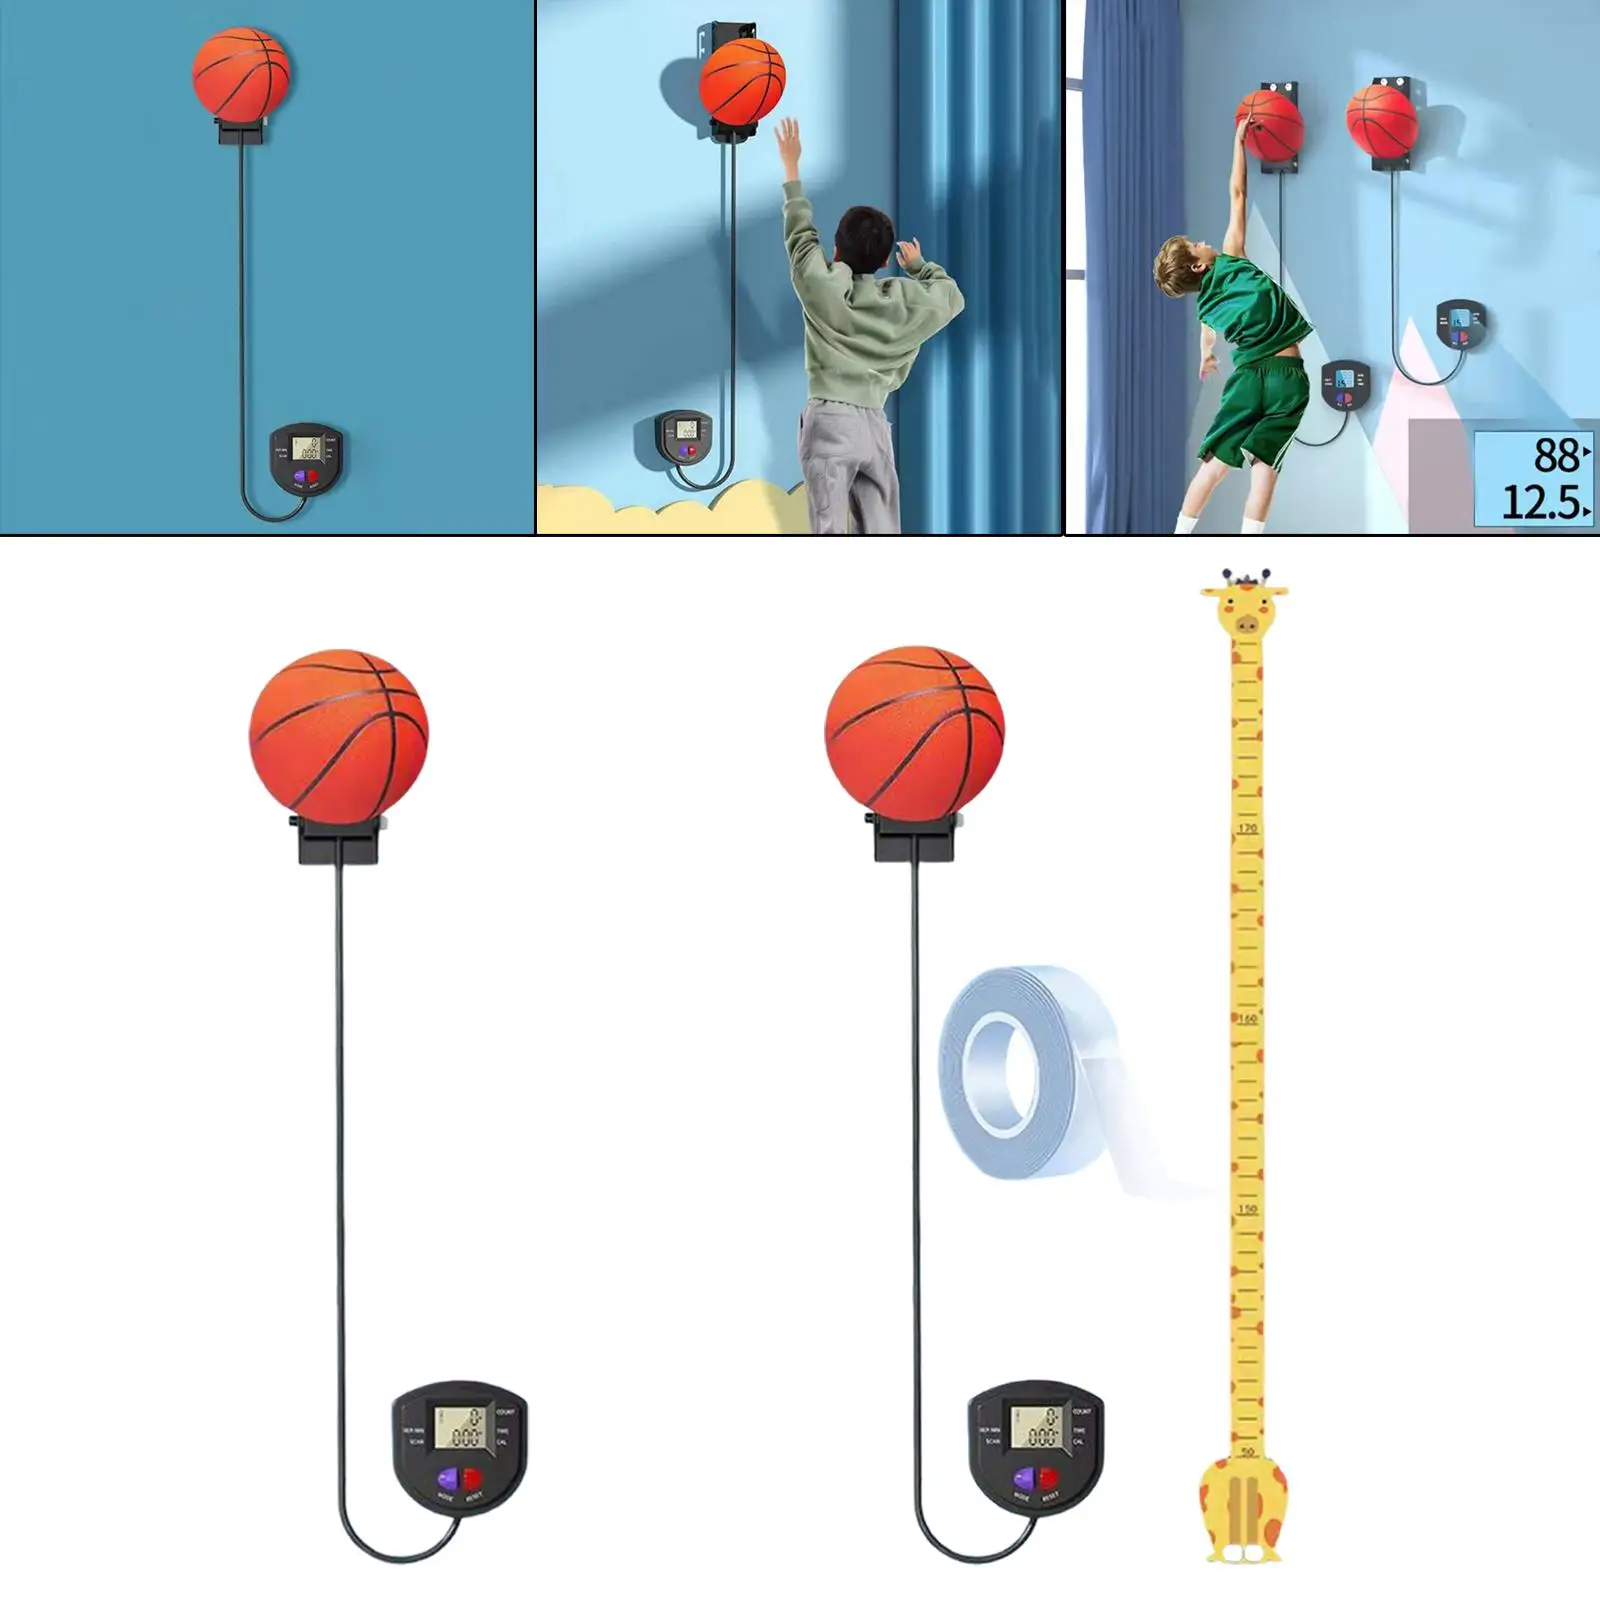 Jumping Trainers Jumping Tool Vertical Jump Children Touch High Equipment Vertical Jump Tester for Sports Exercise Training Kids